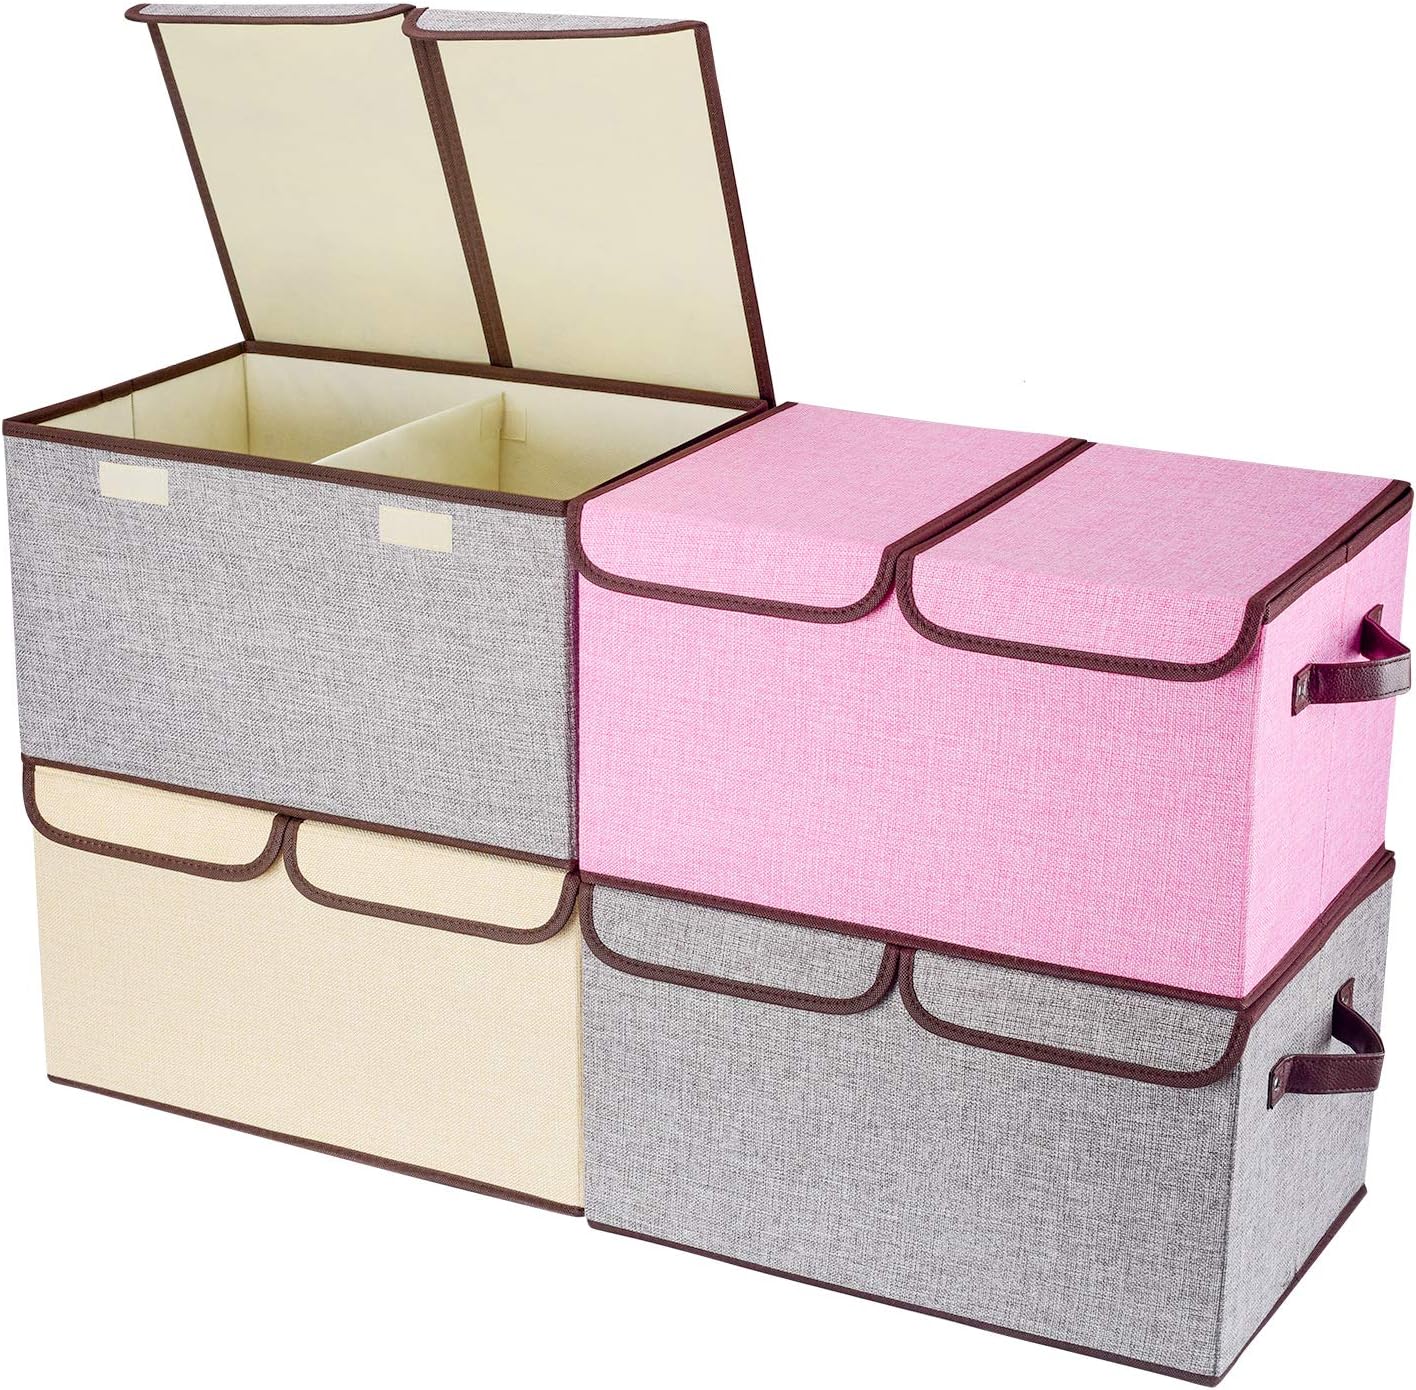 Larger Storage Cubes [4-Pack] Senbowe 33 Quart Linen Fabric Foldable Collapsible Storage Cube Bin Organizer Basket with Lid, Handles, Removable Divider For Home, Nursery, Closet - (16.5 x 11.8 x 9.8)